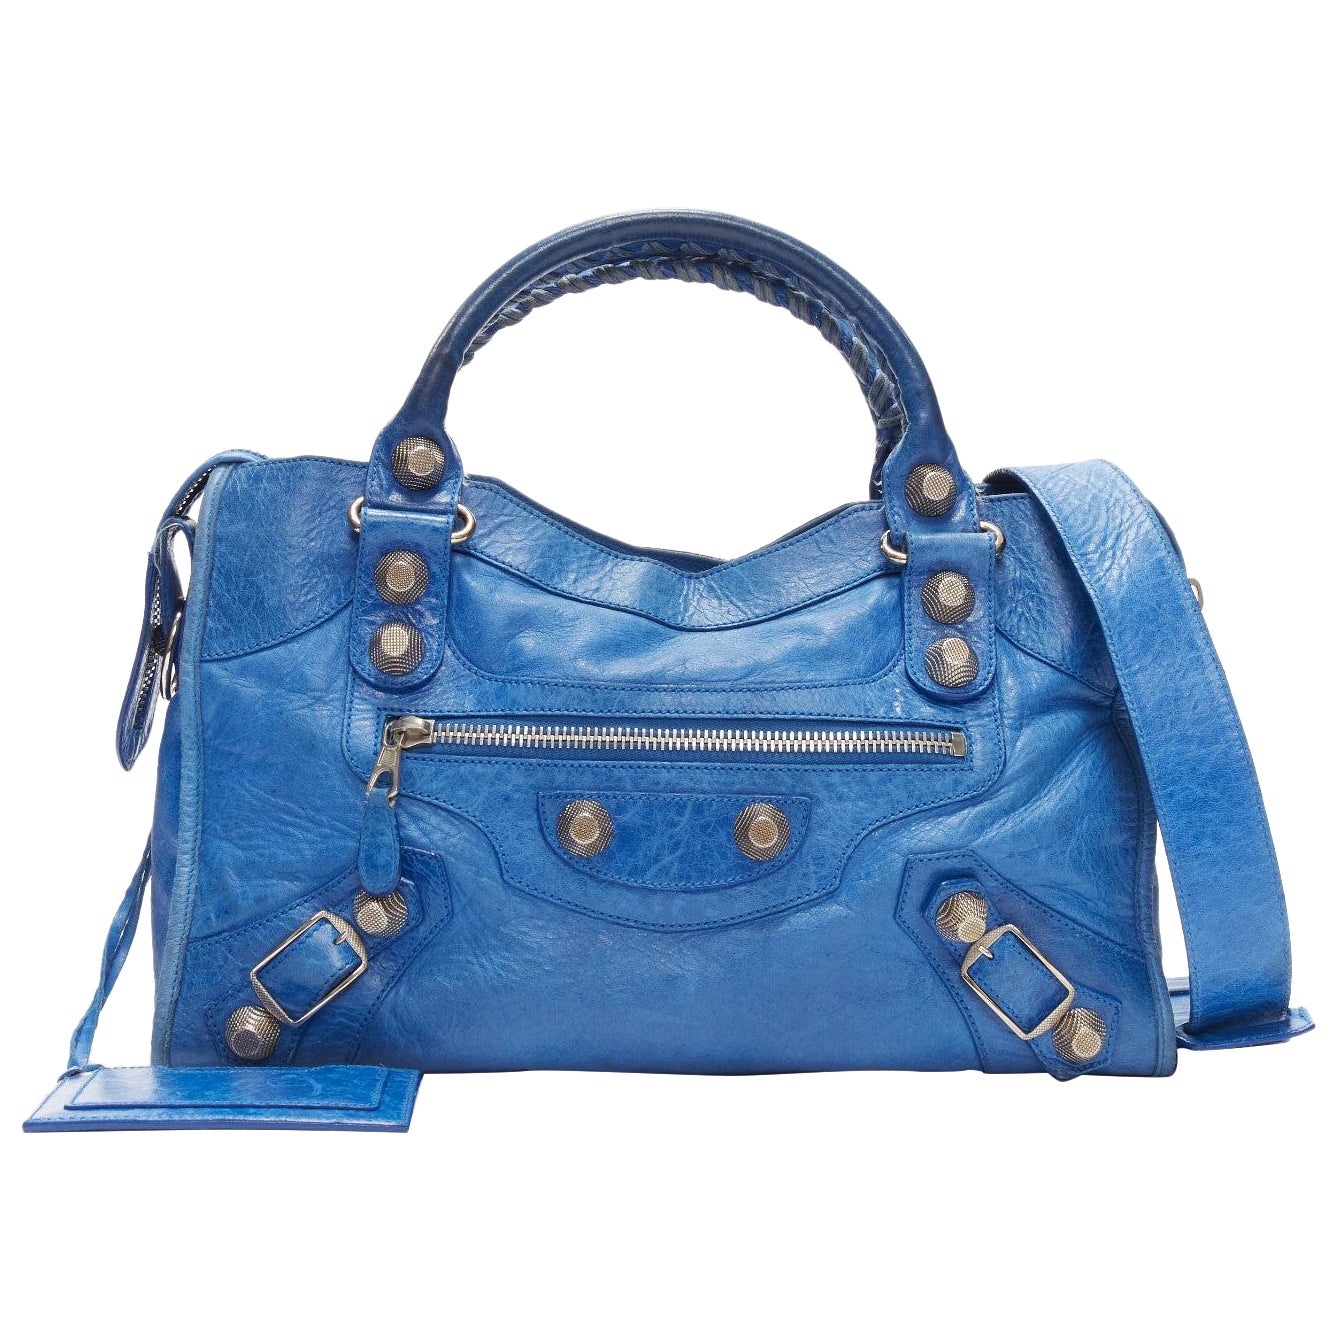 BALENCIAGA Giant 21 City blue leather SHW motorcycle tote bag